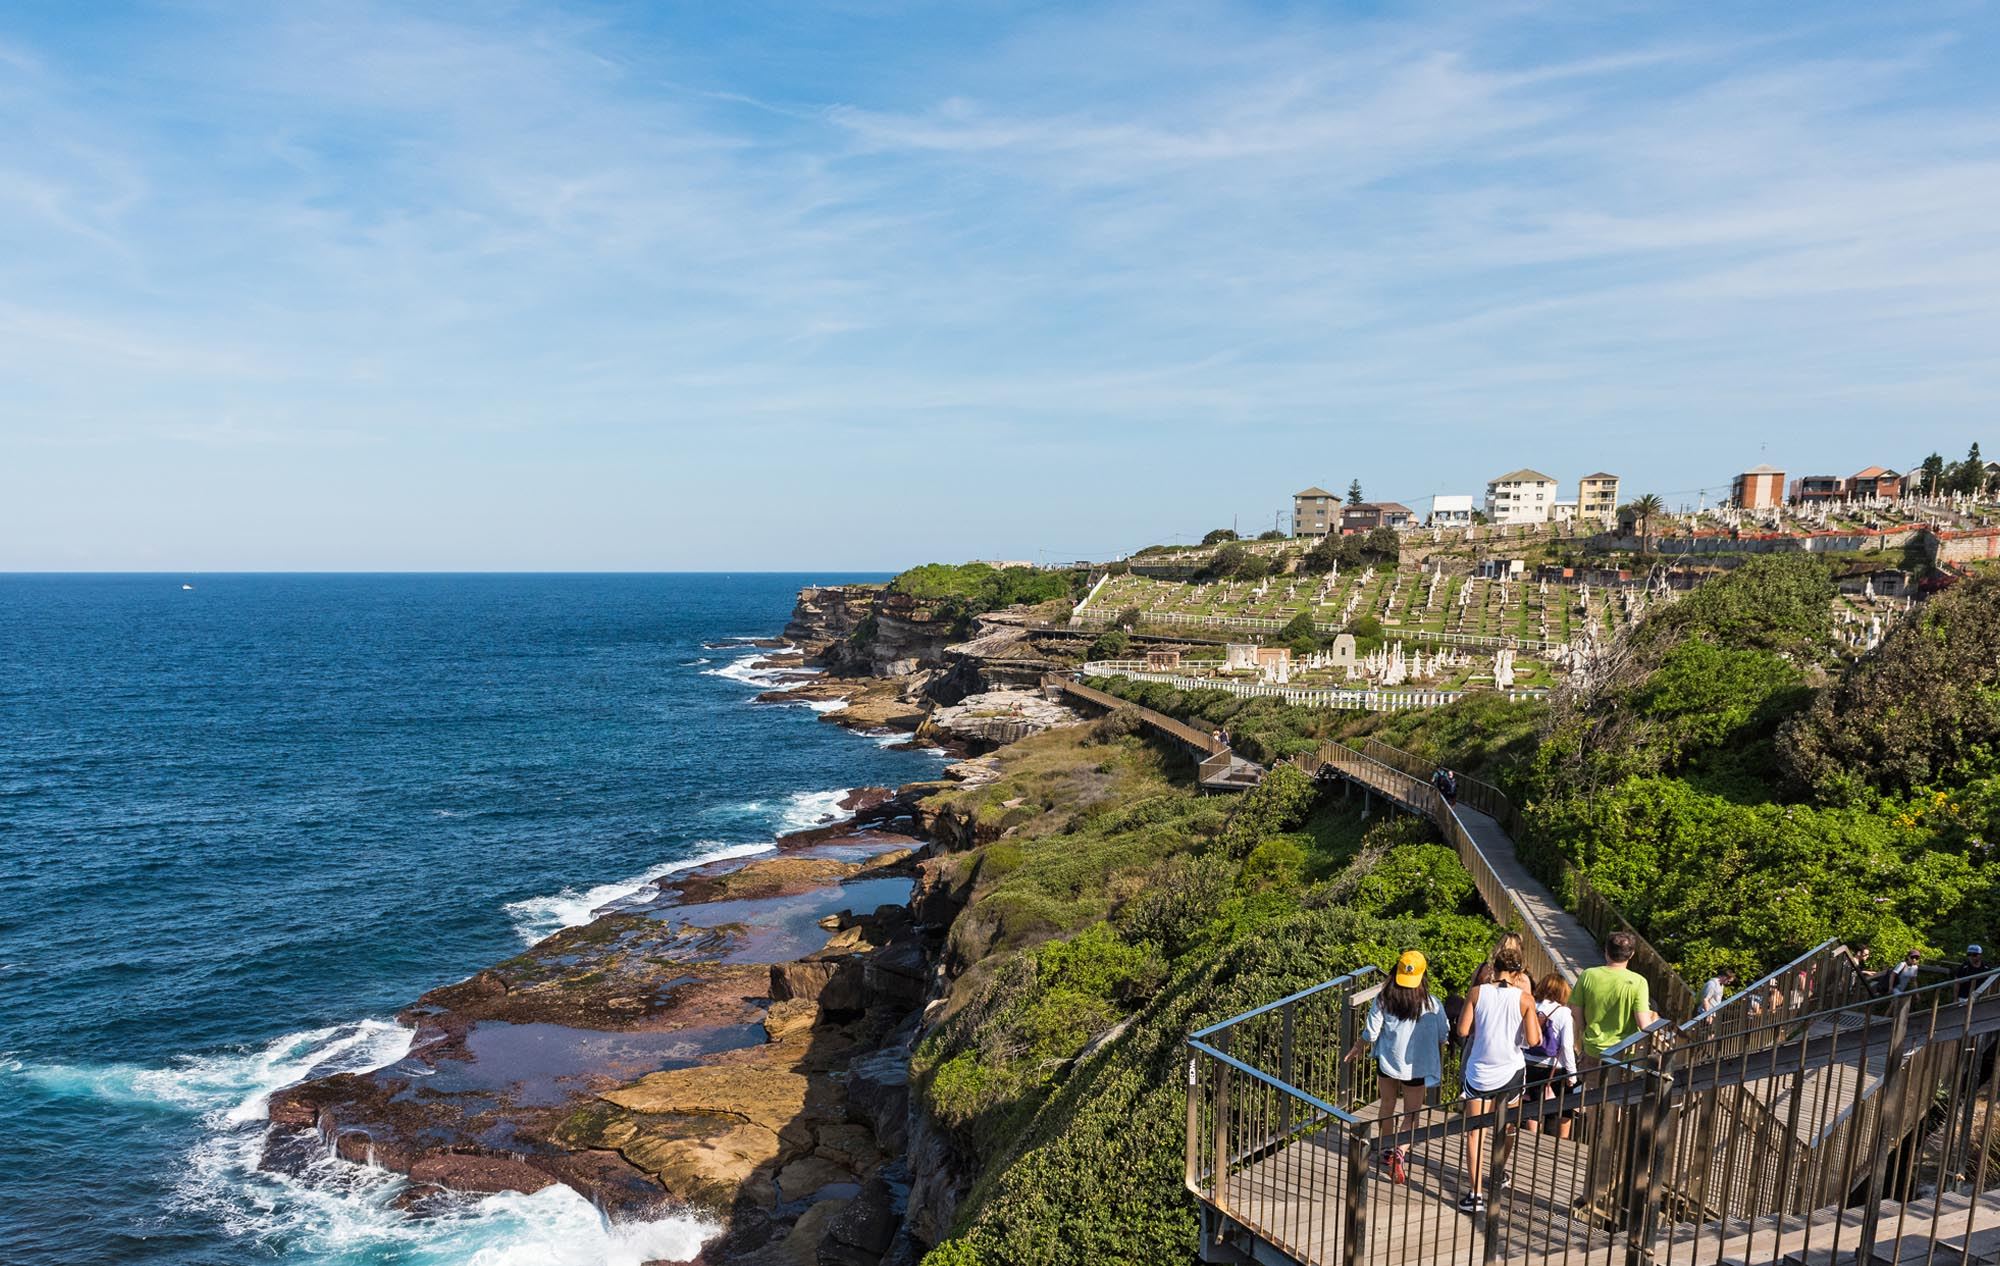 People walking to Waverley Cemetery along the Bondi to Coogee coastal walk in Sydney, Australia. A cliff top coastal walk featuring stunning views, beaches, parks, cliffs, bays and rock pools